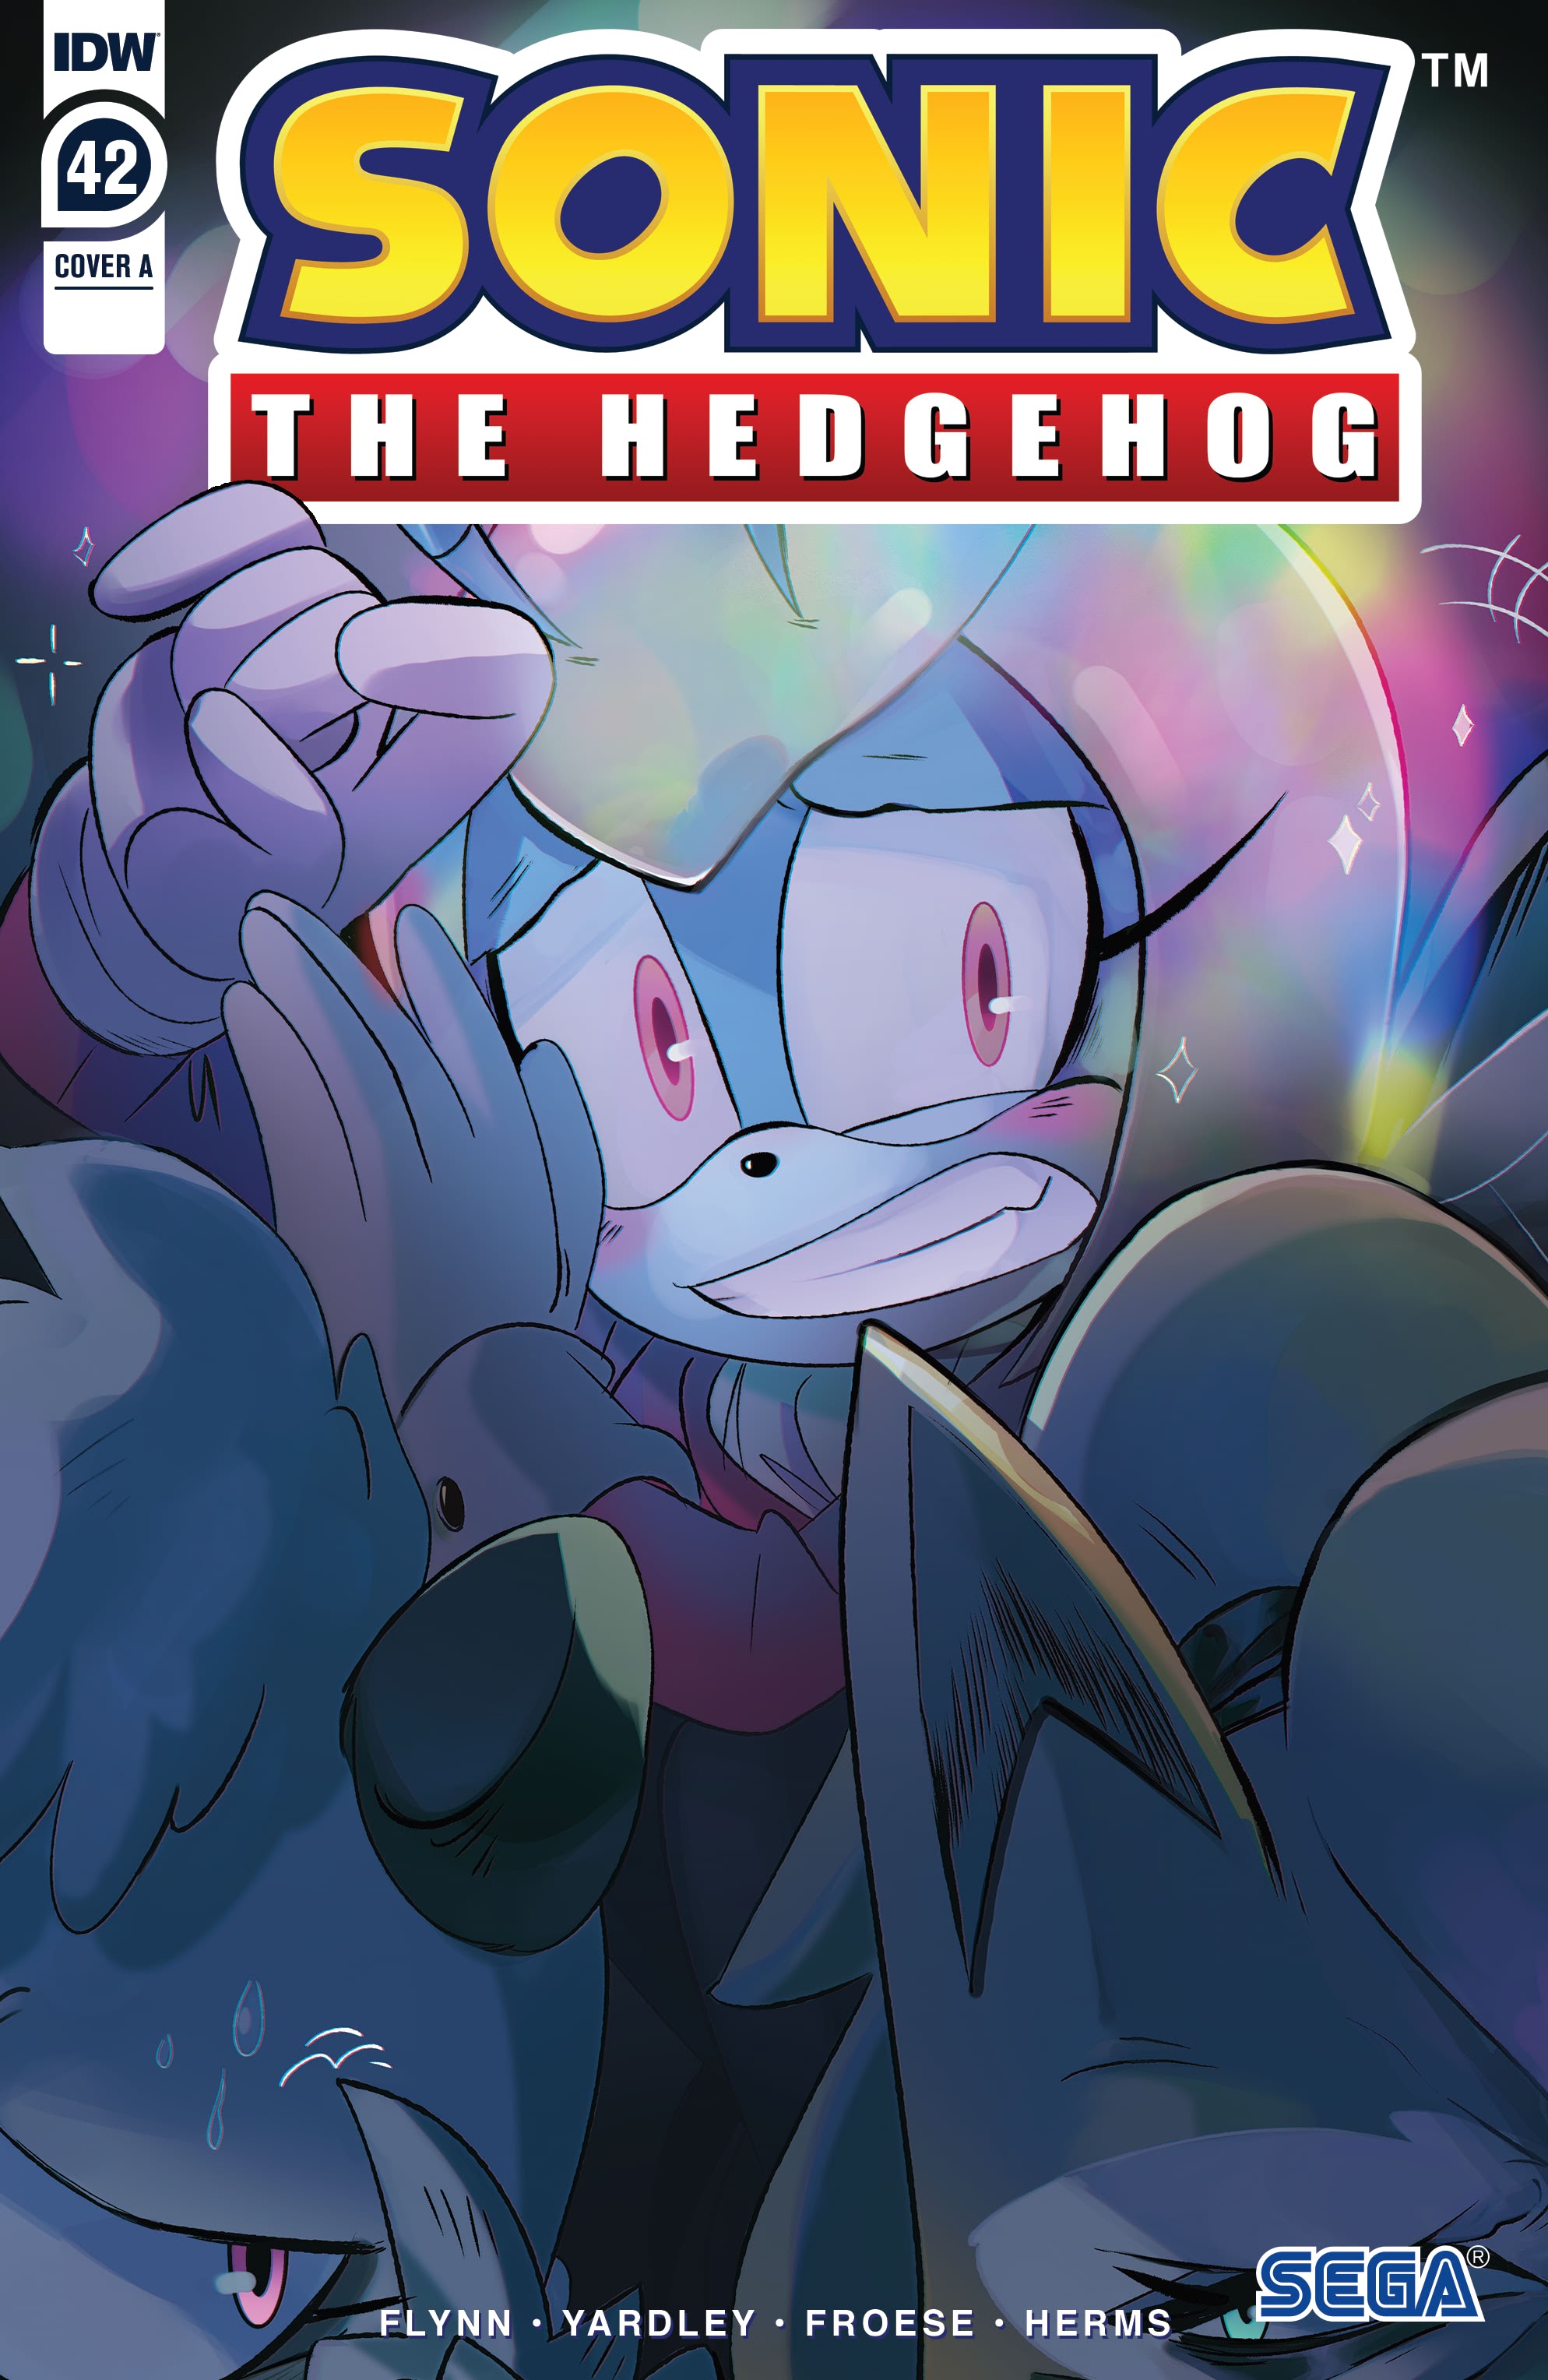 Sonic Tranny Porn - Sonic The Hedgehog 2018 Issue 42 | Read Sonic The Hedgehog 2018 Issue 42  comic online in high quality. Read Full Comic online for free - Read comics  online in high quality .| READ COMIC ONLINE